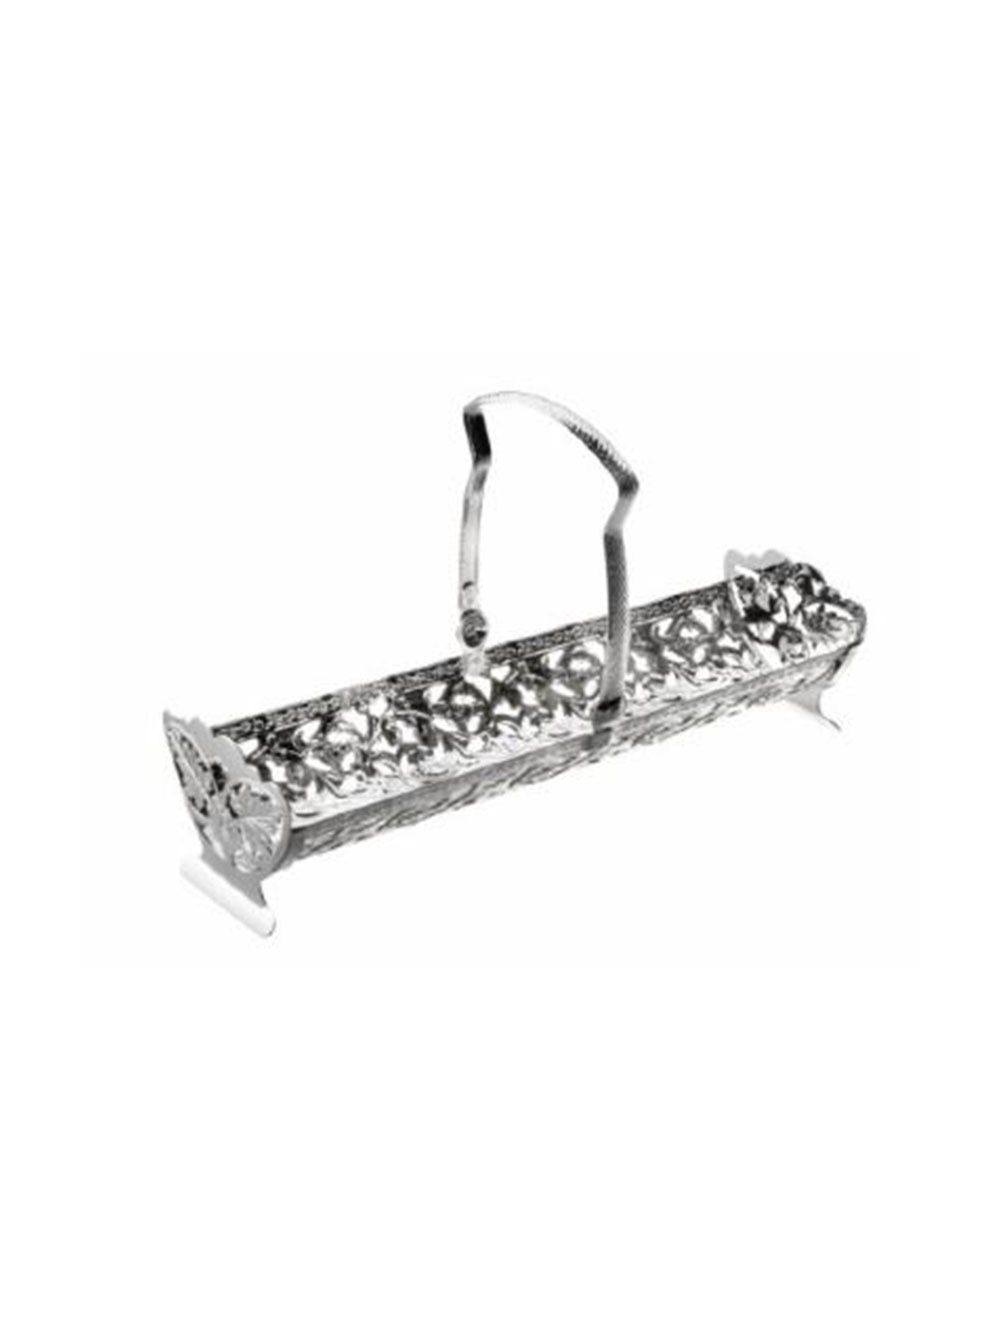 Queen Anne Silver-Plated Biscuit Holder 22x7x11.5